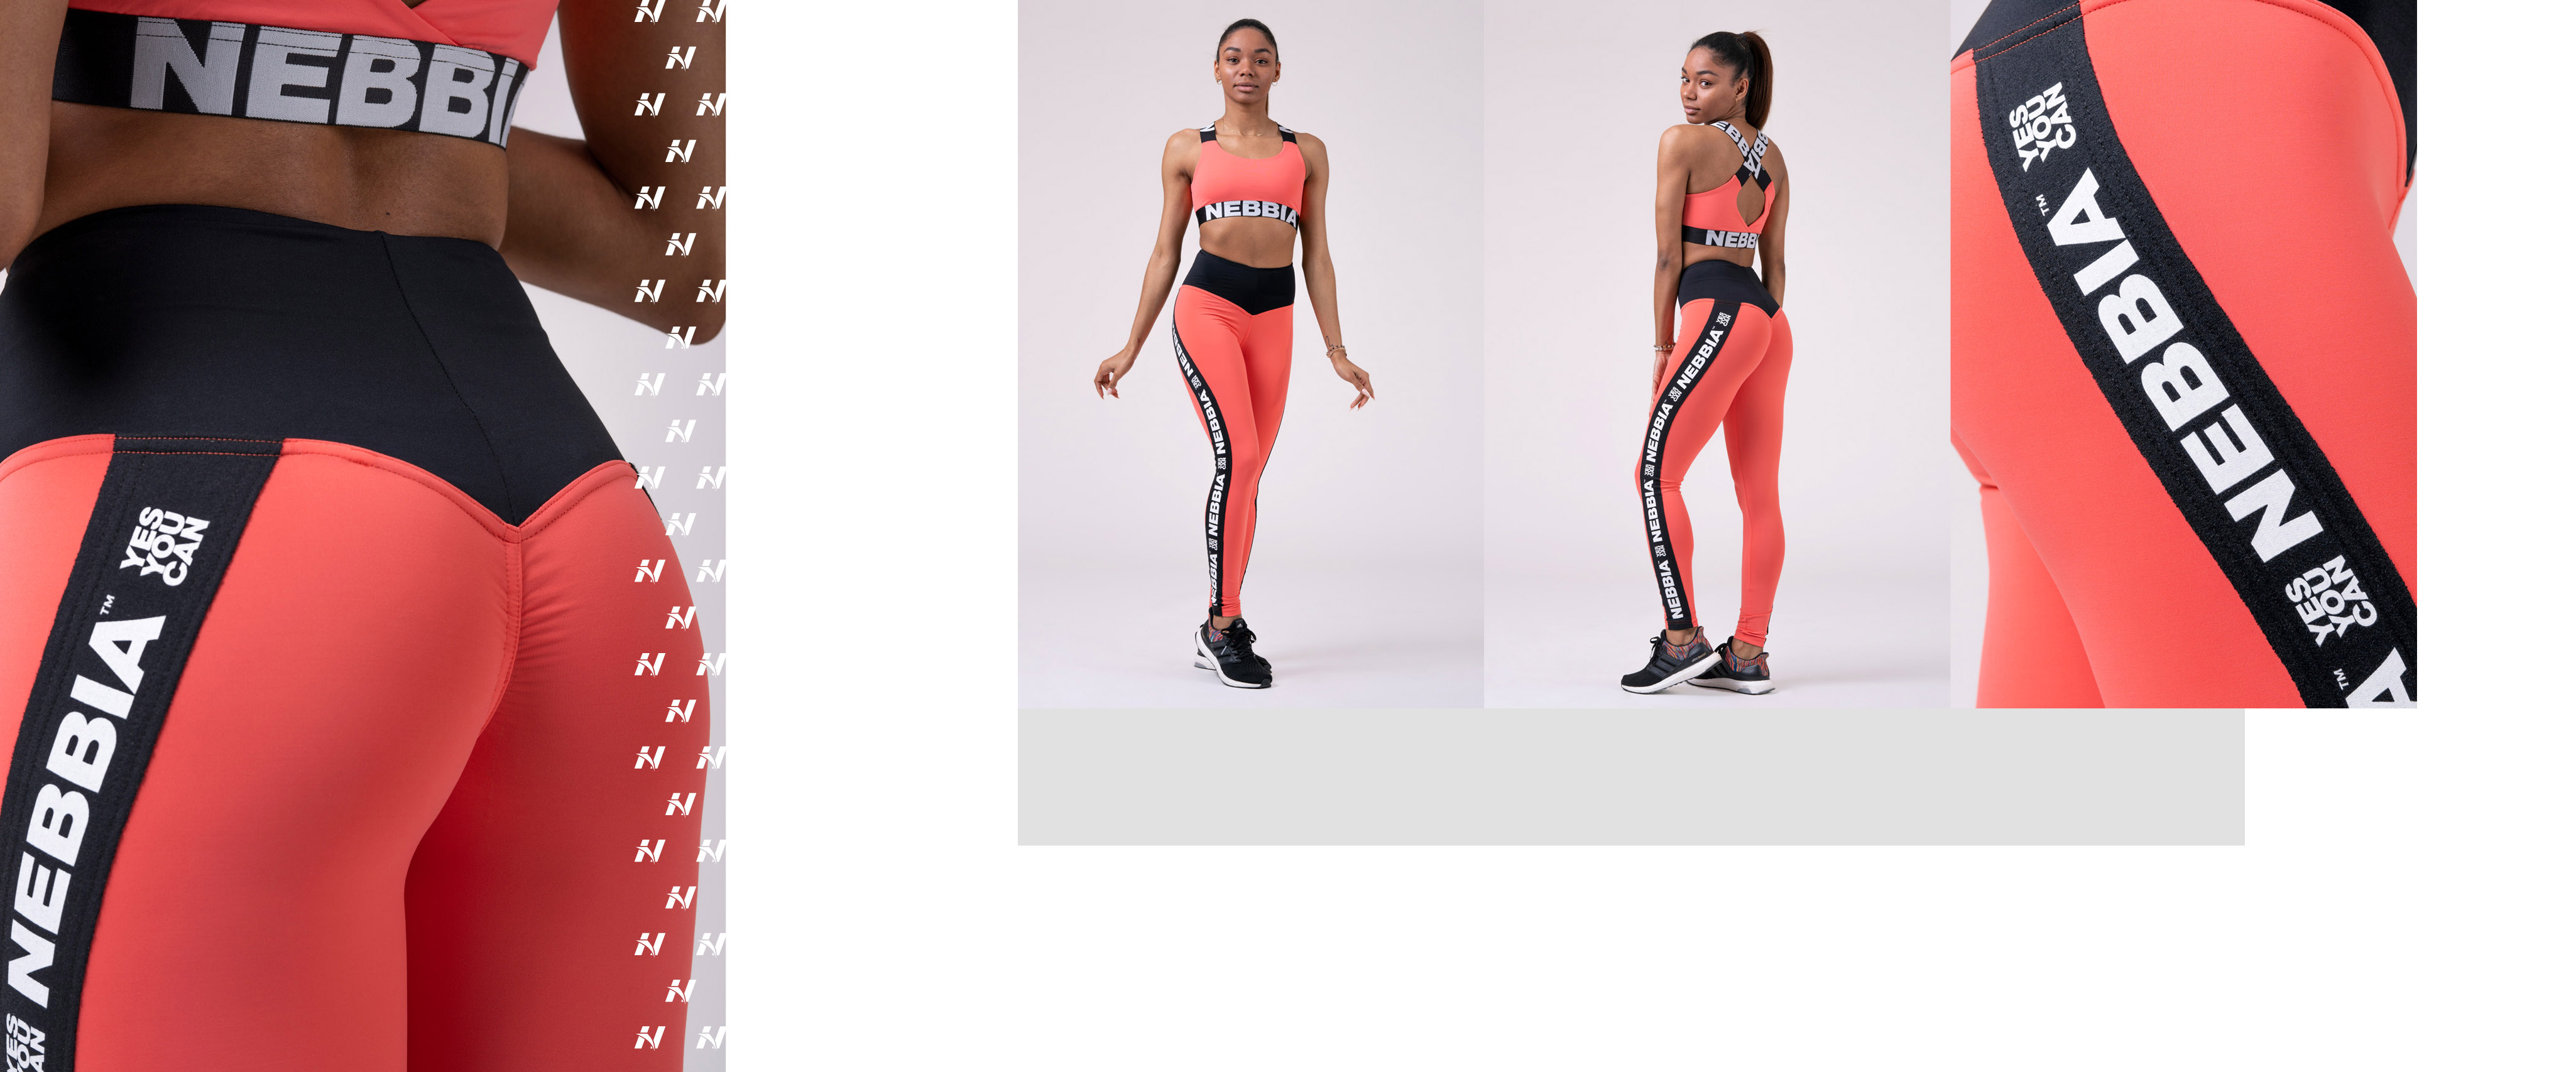 MEET THE HERO – The new gym wear collection by NEBBIA